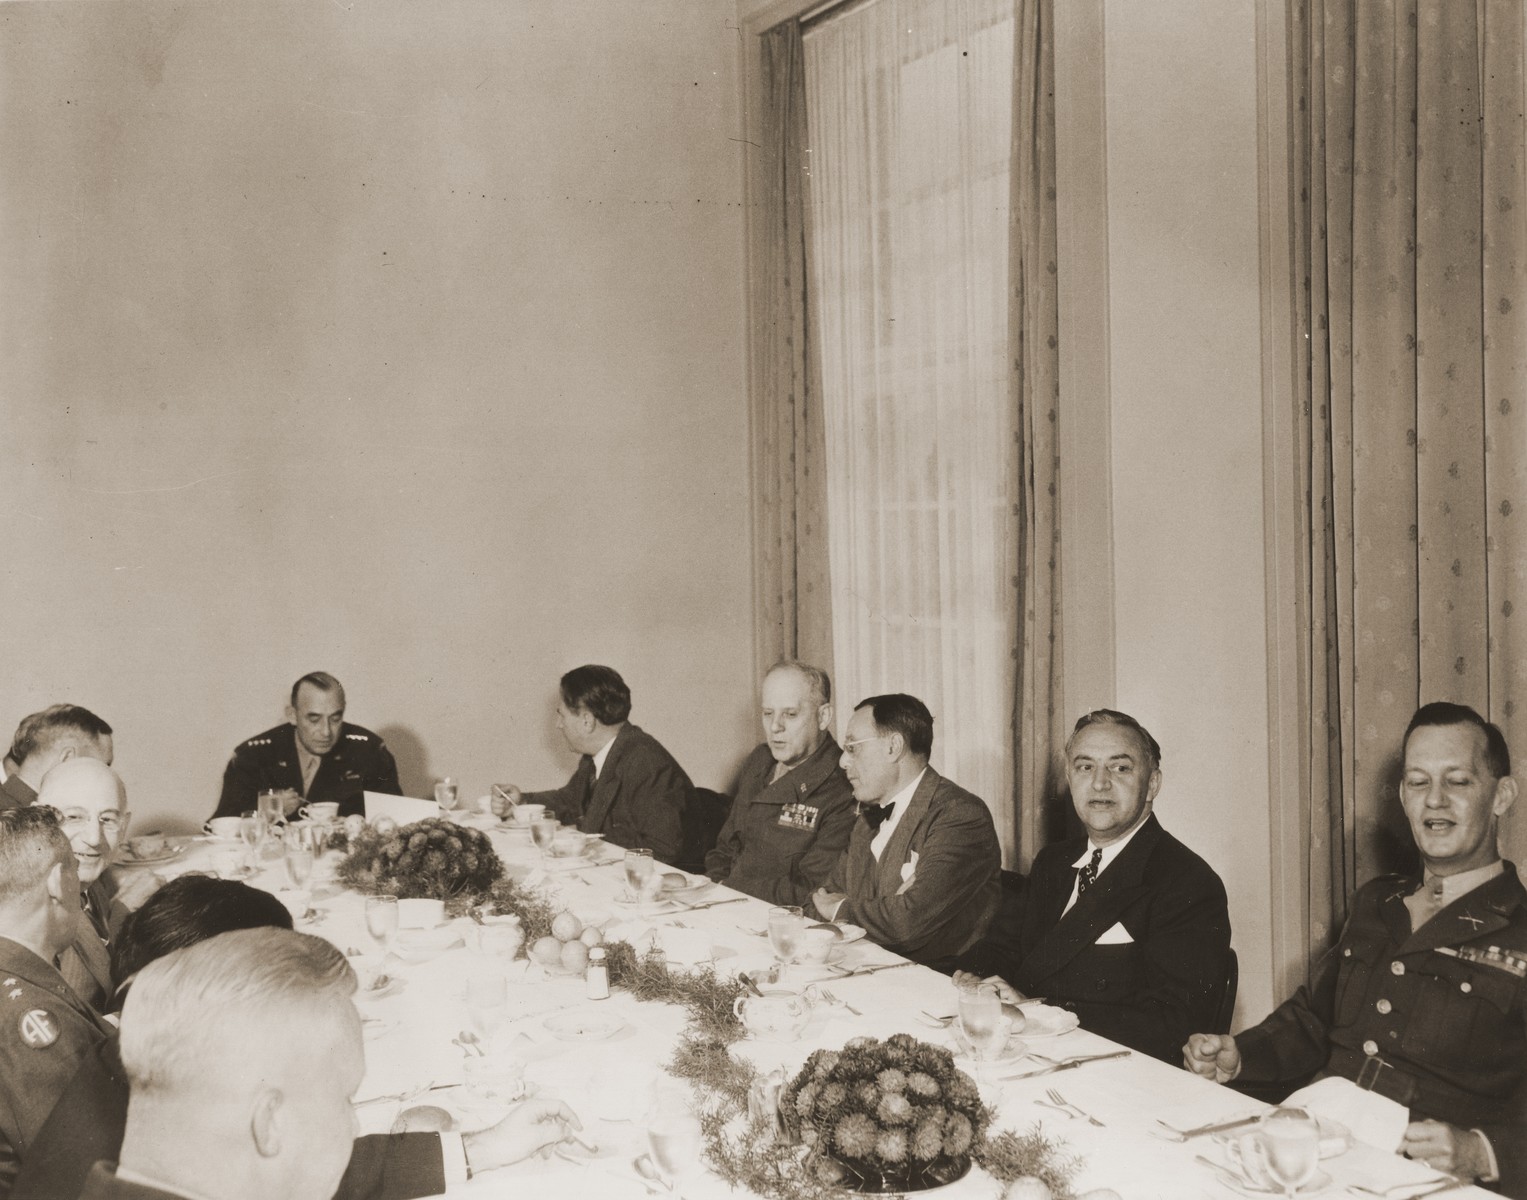 Visiting American Jewish leaders meet over dinner with the commanders of the American army of occupation in Germany.  The meeting took place at military headquarters located in the former I.G. Farben facility in Frankfurt am Main.

Pictured counter-clockwise from the right are: unknown; Rabbi Phillip Bernstein; Philip Forman; General Clarence Huebner; Nahum Goldmann; General Joseph McNarney; Rabbi Stephen Wise; unknown; Jacob Blaustein; unknown; unknown; and Colonel George Scithers.